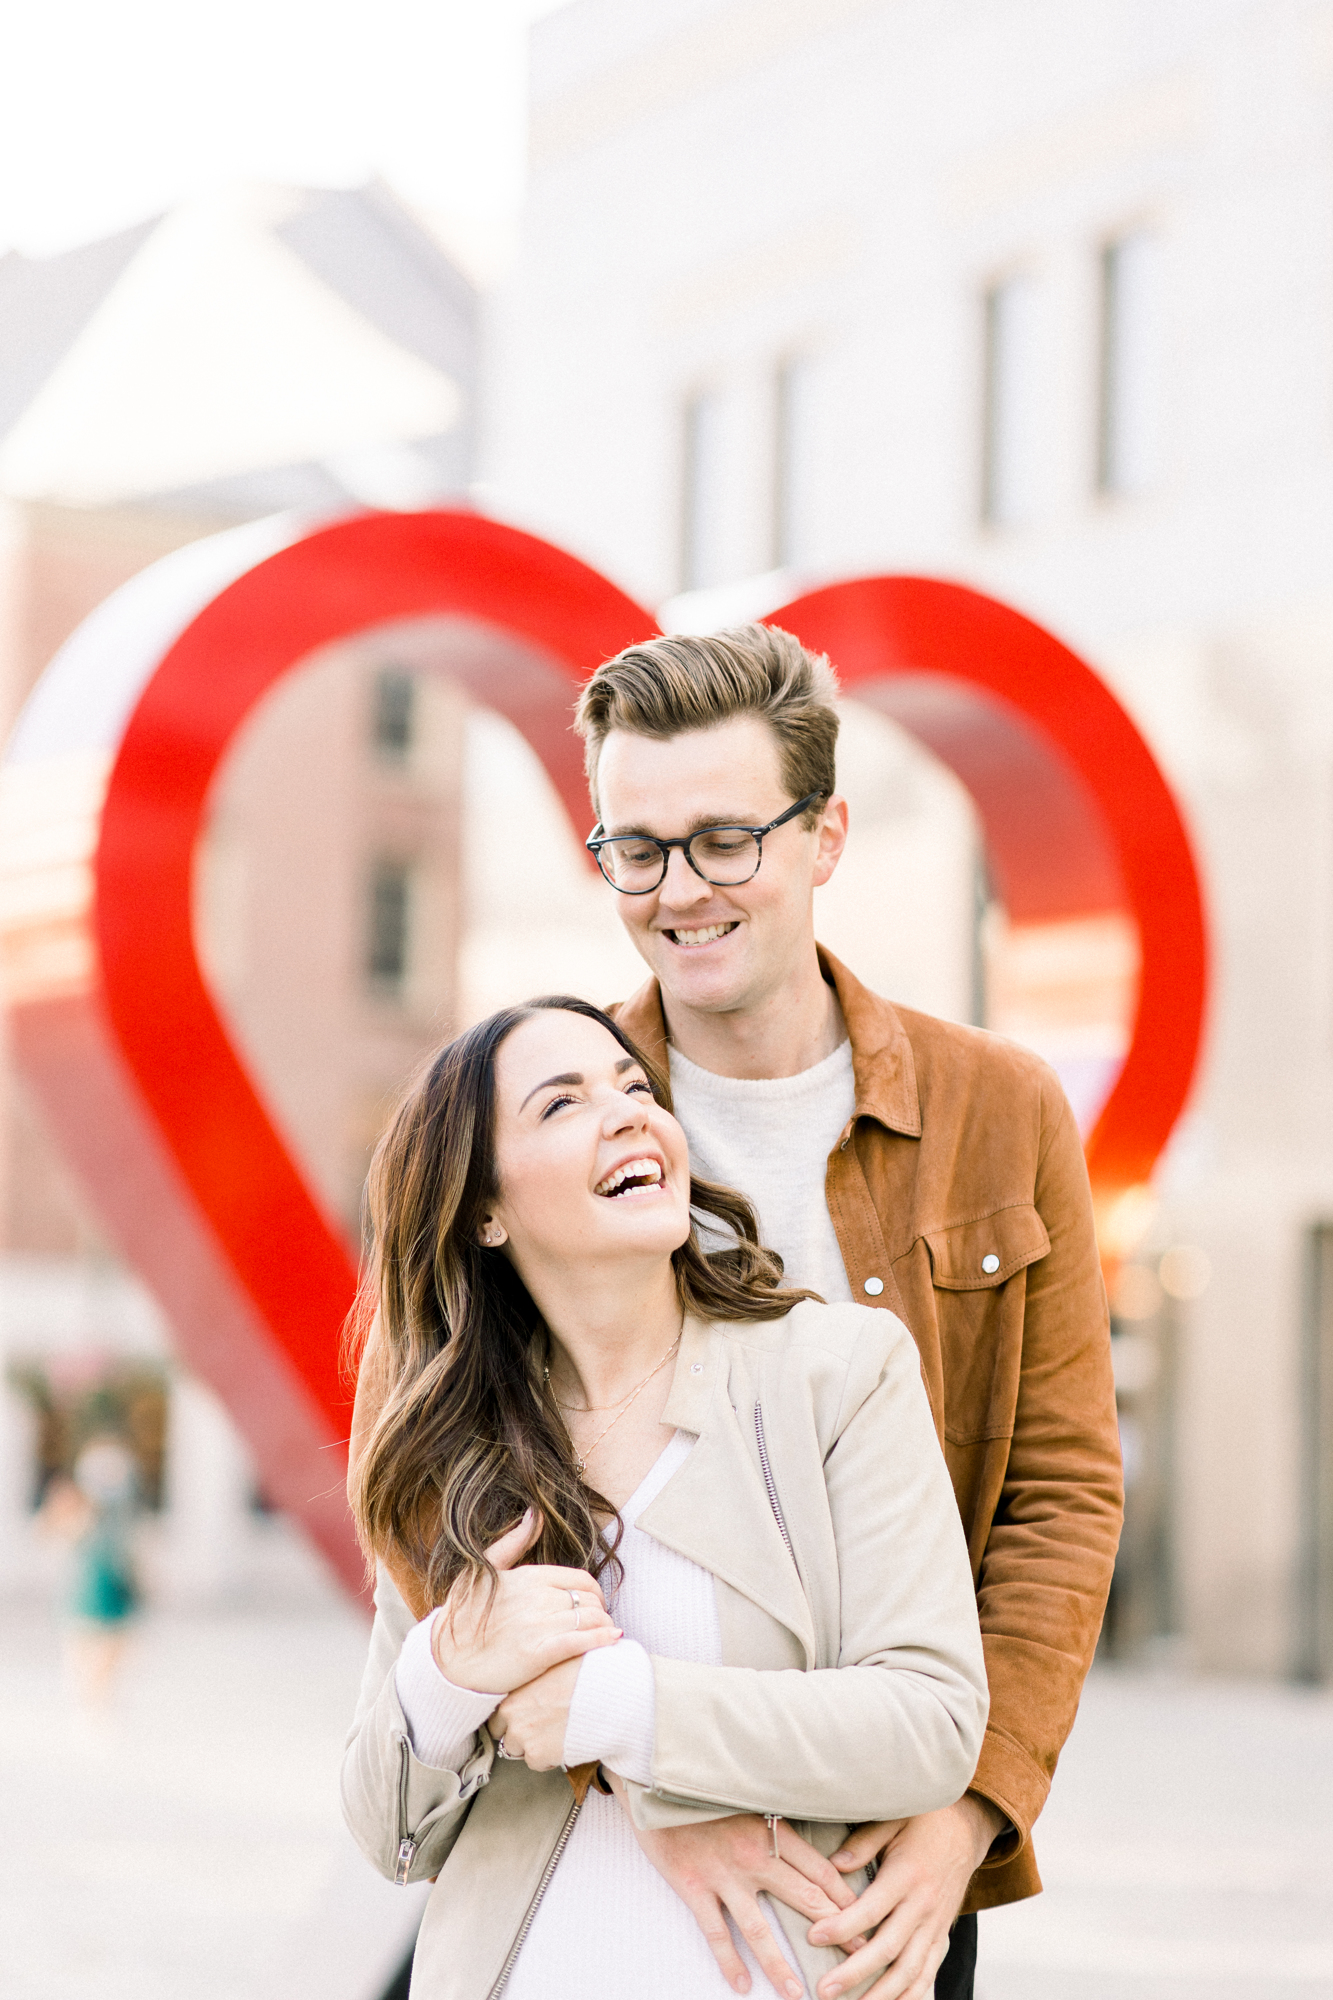 How to Pose for a Camera with Your Engagement Photographer